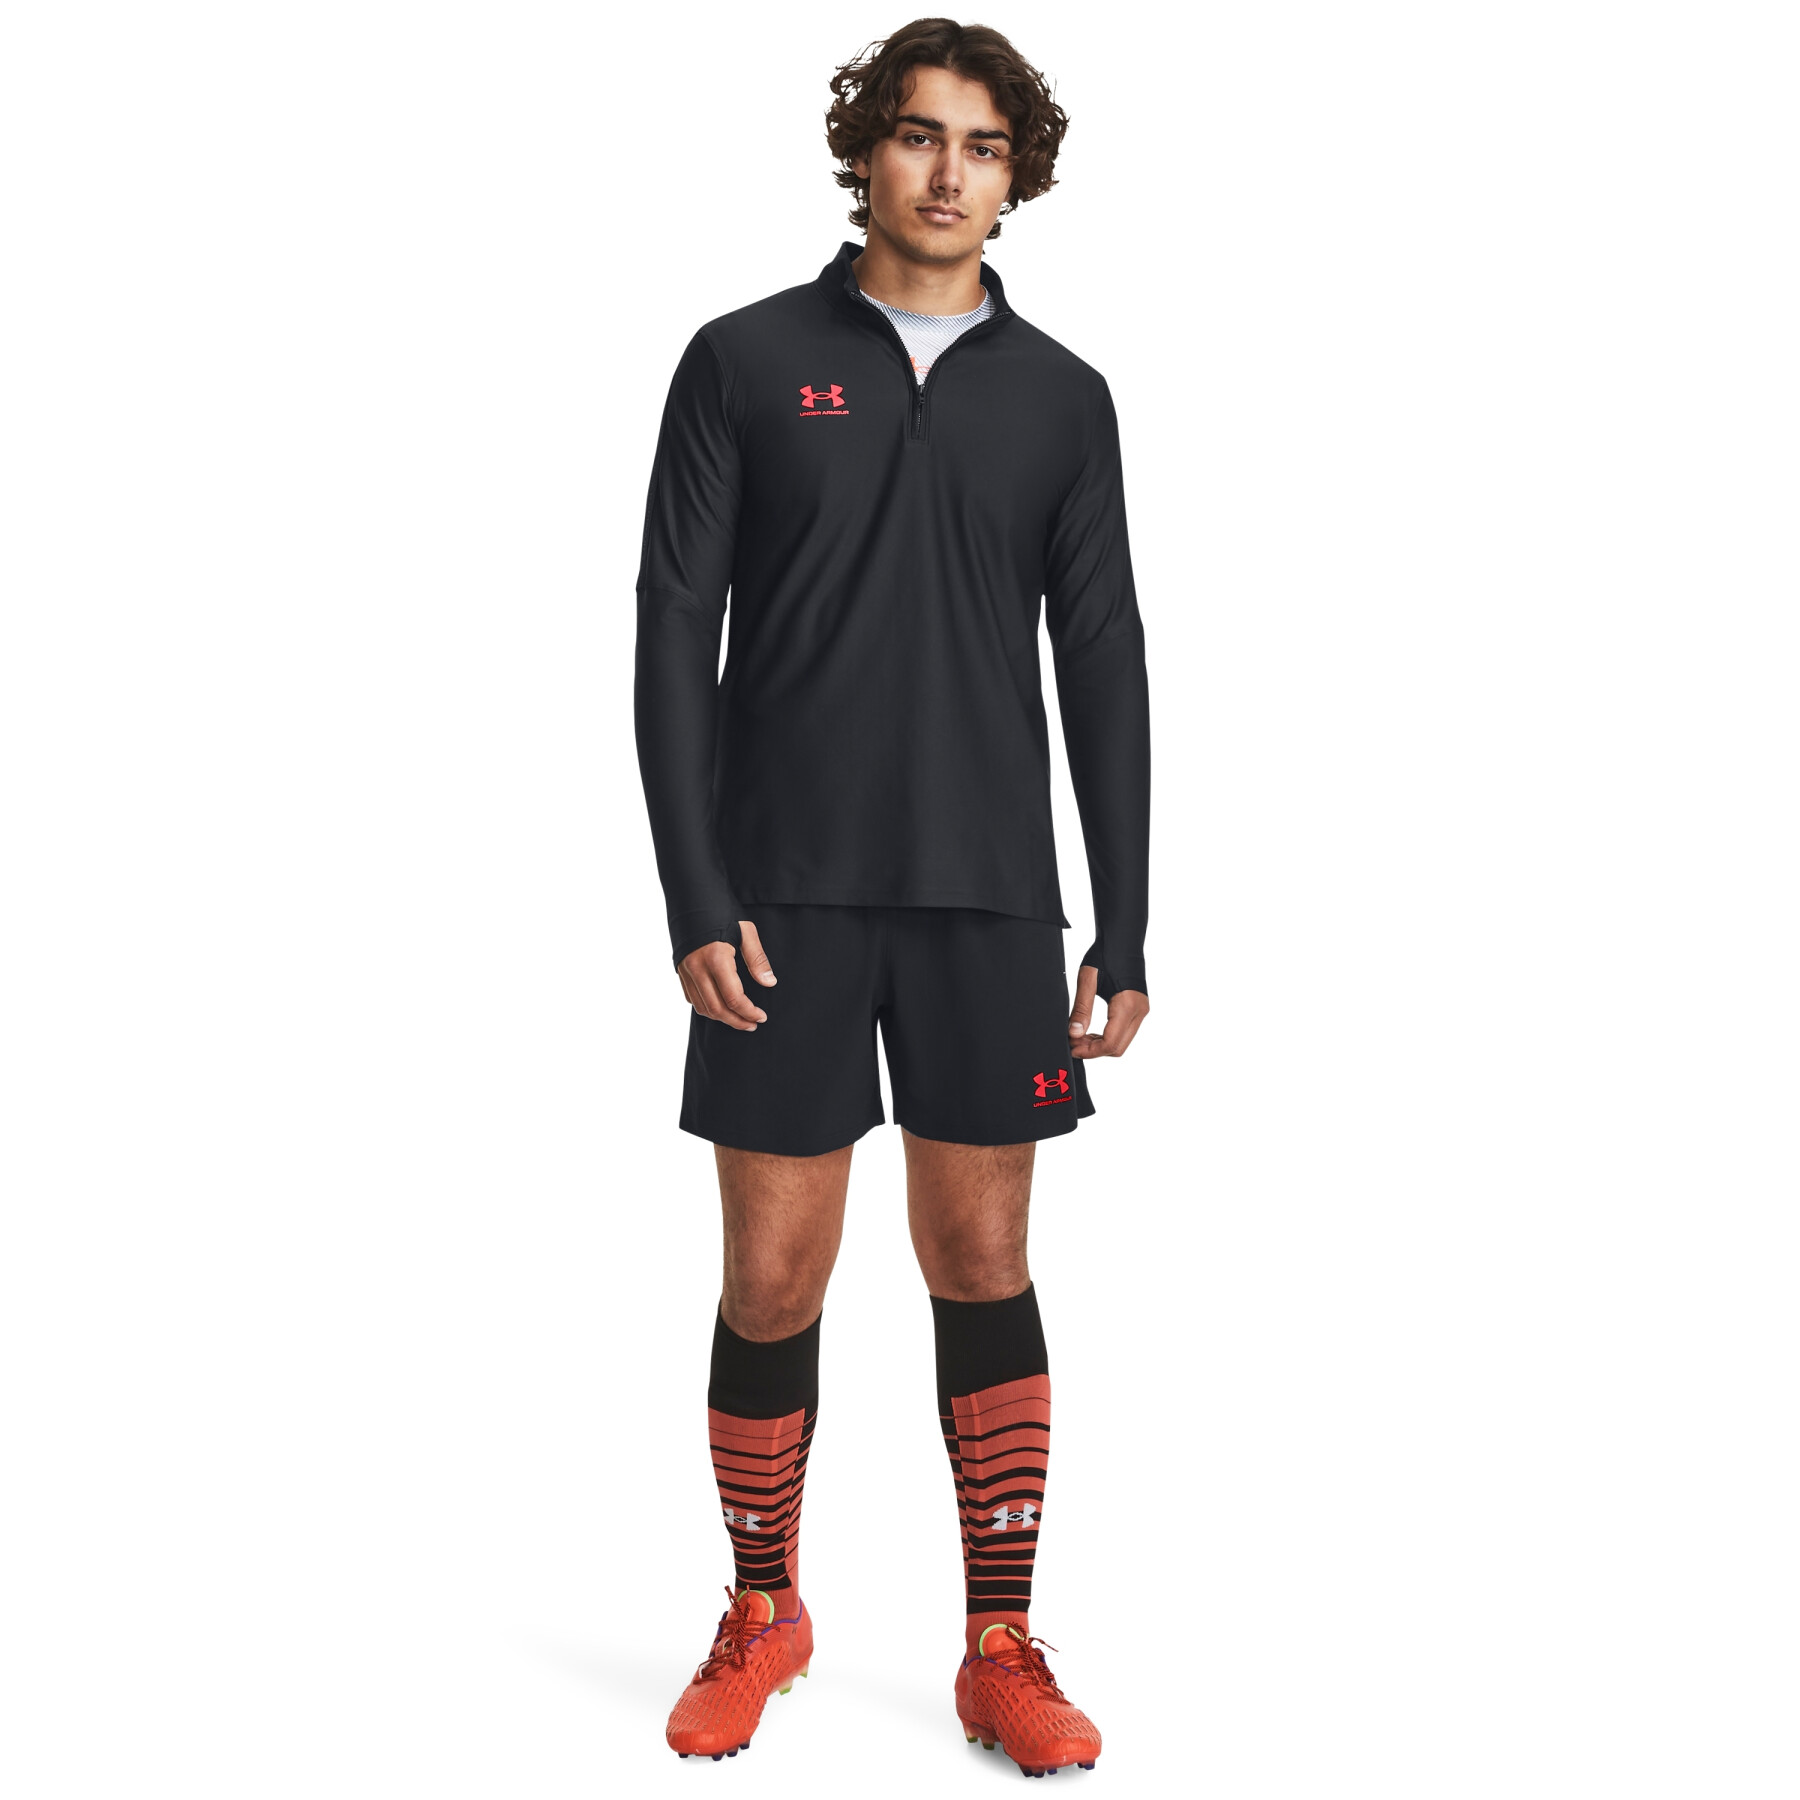 Long-sleeved 1/4 zip athletic top Under Armour Challenger Pro